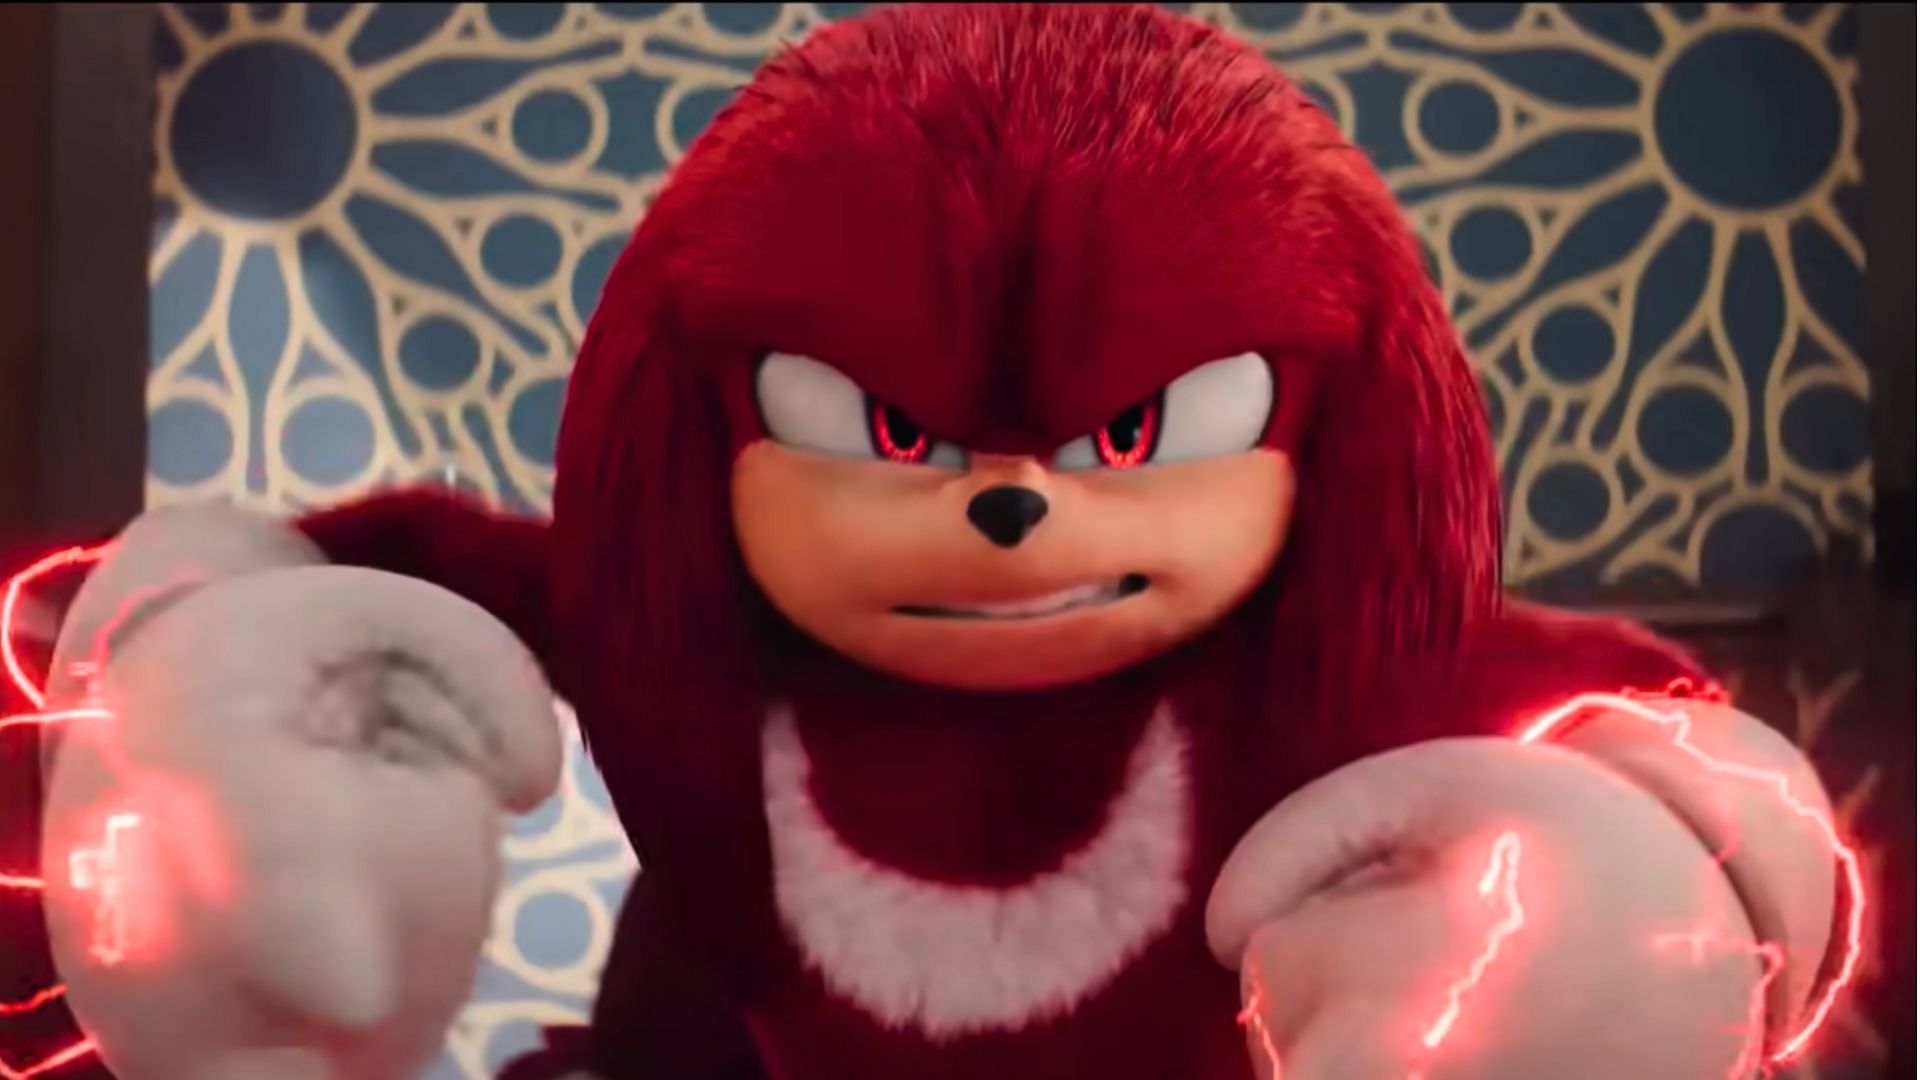 Knuckles is a spinoff of the Sonic movies (Image via Paramount+)